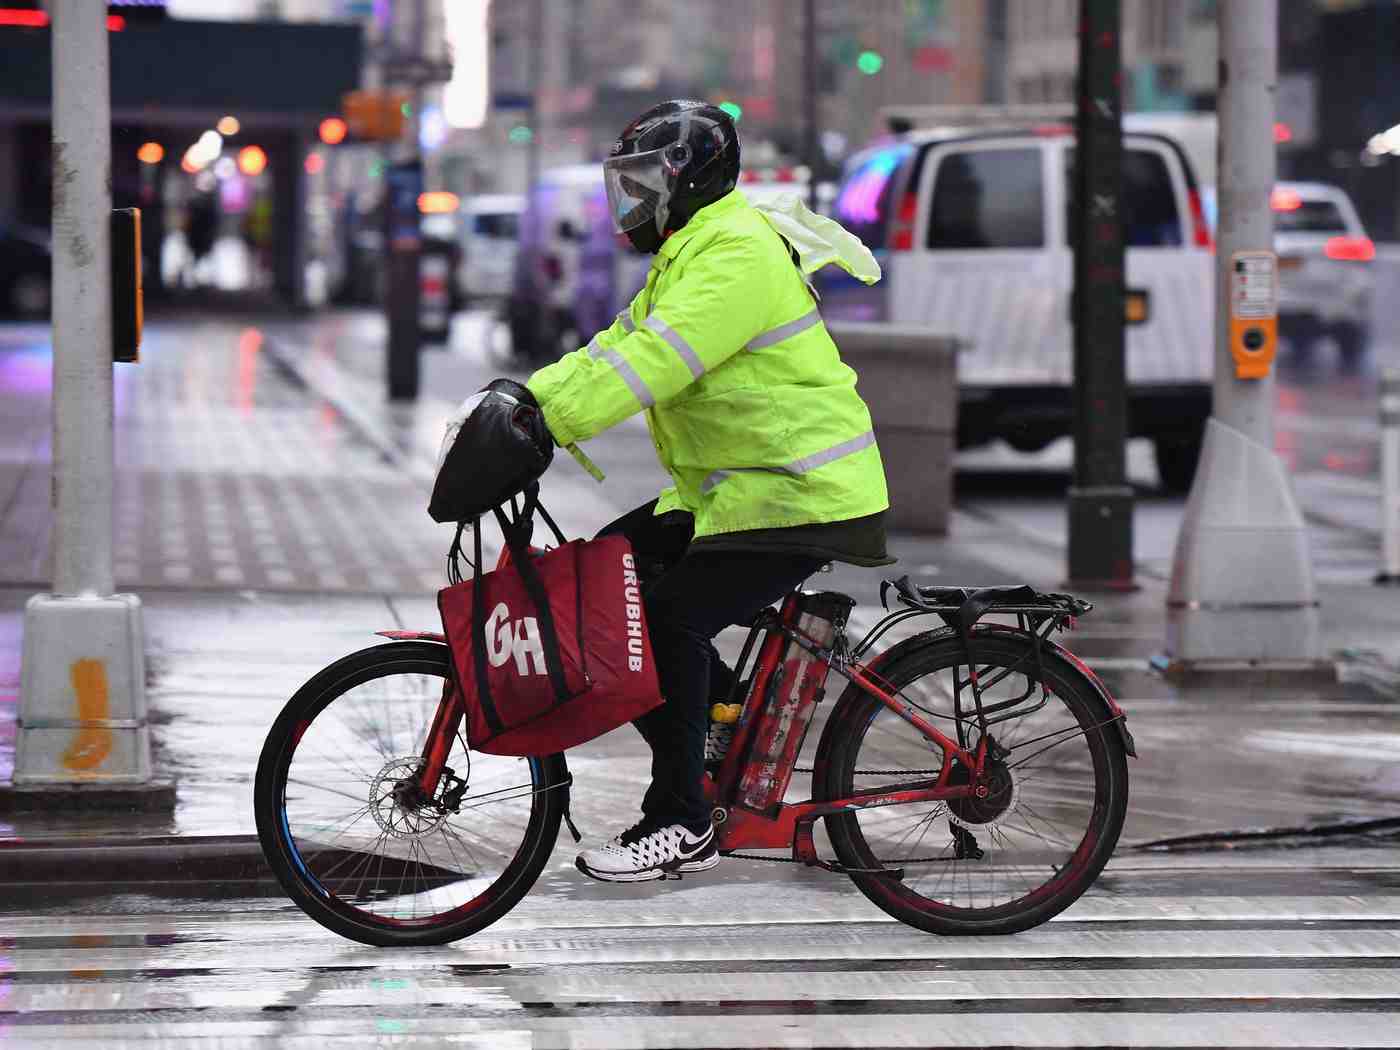 Why are e-bikes banned in New York?